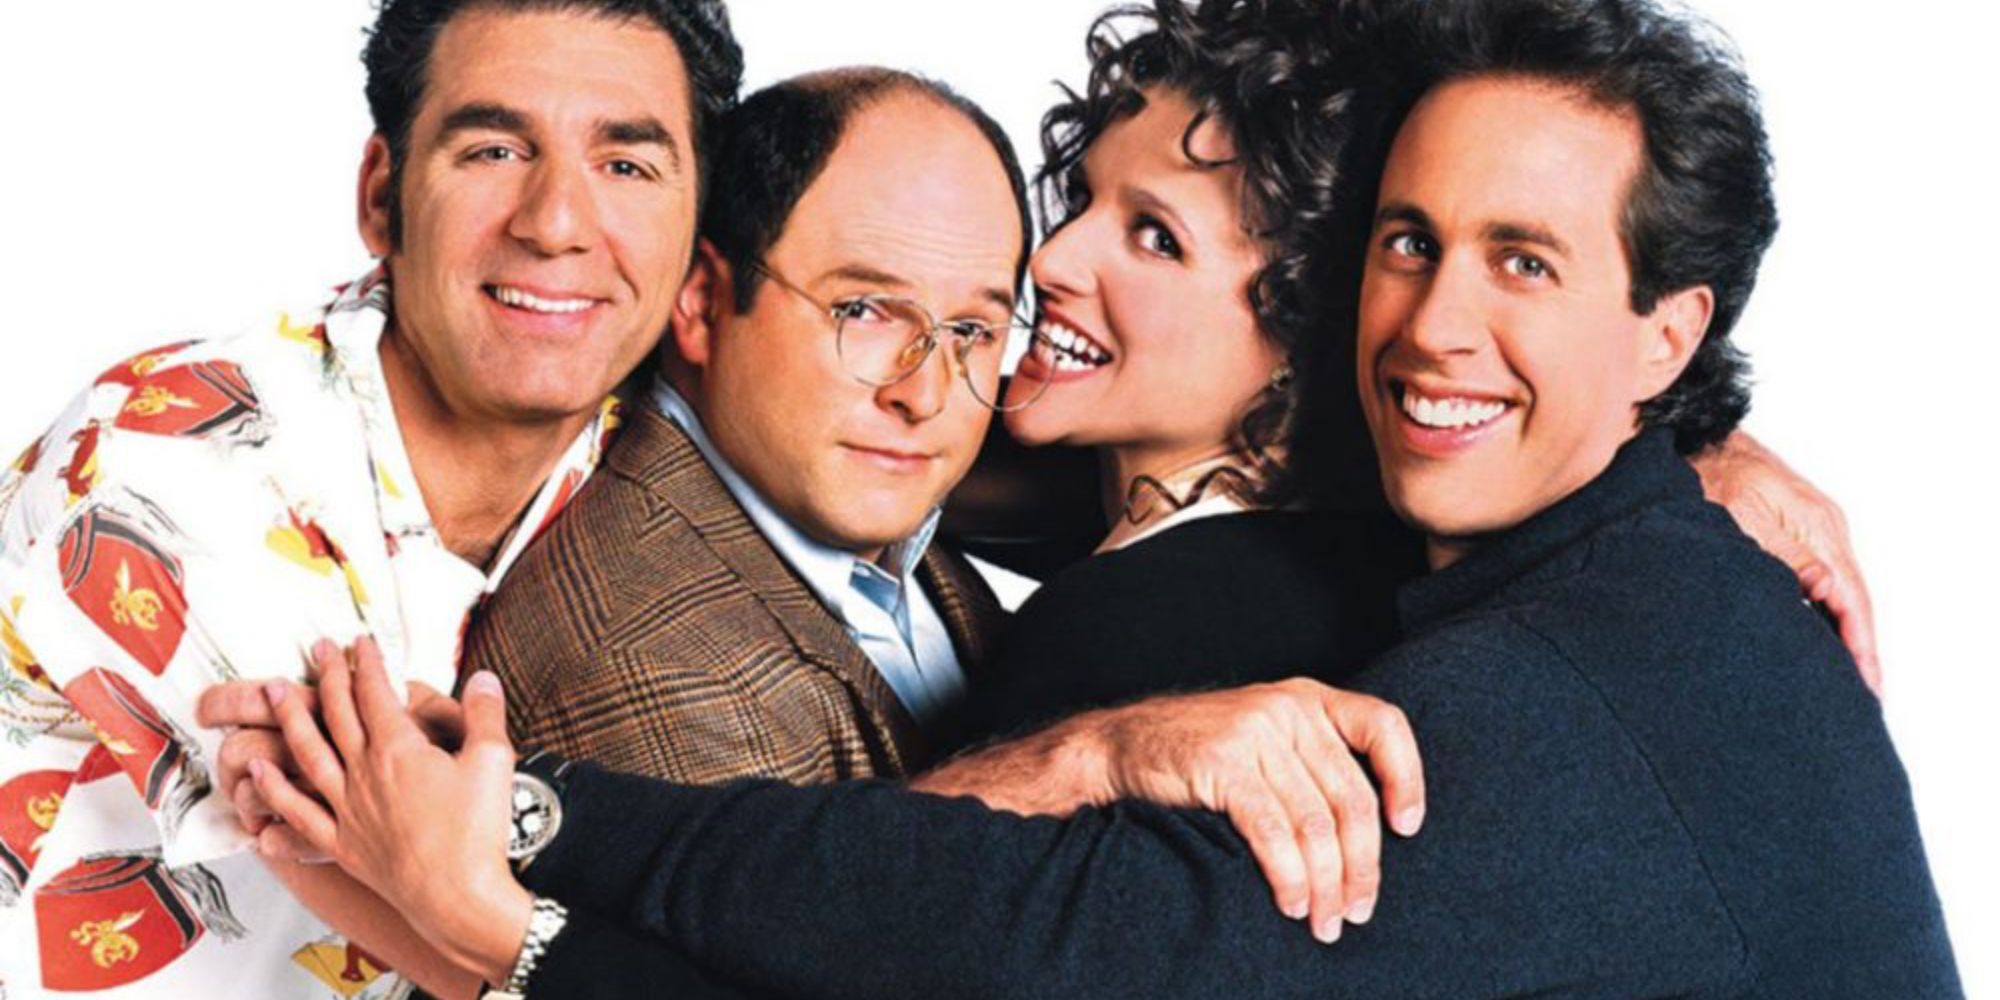 Kramer, George, Elaine, and Jerry from Seinfeld